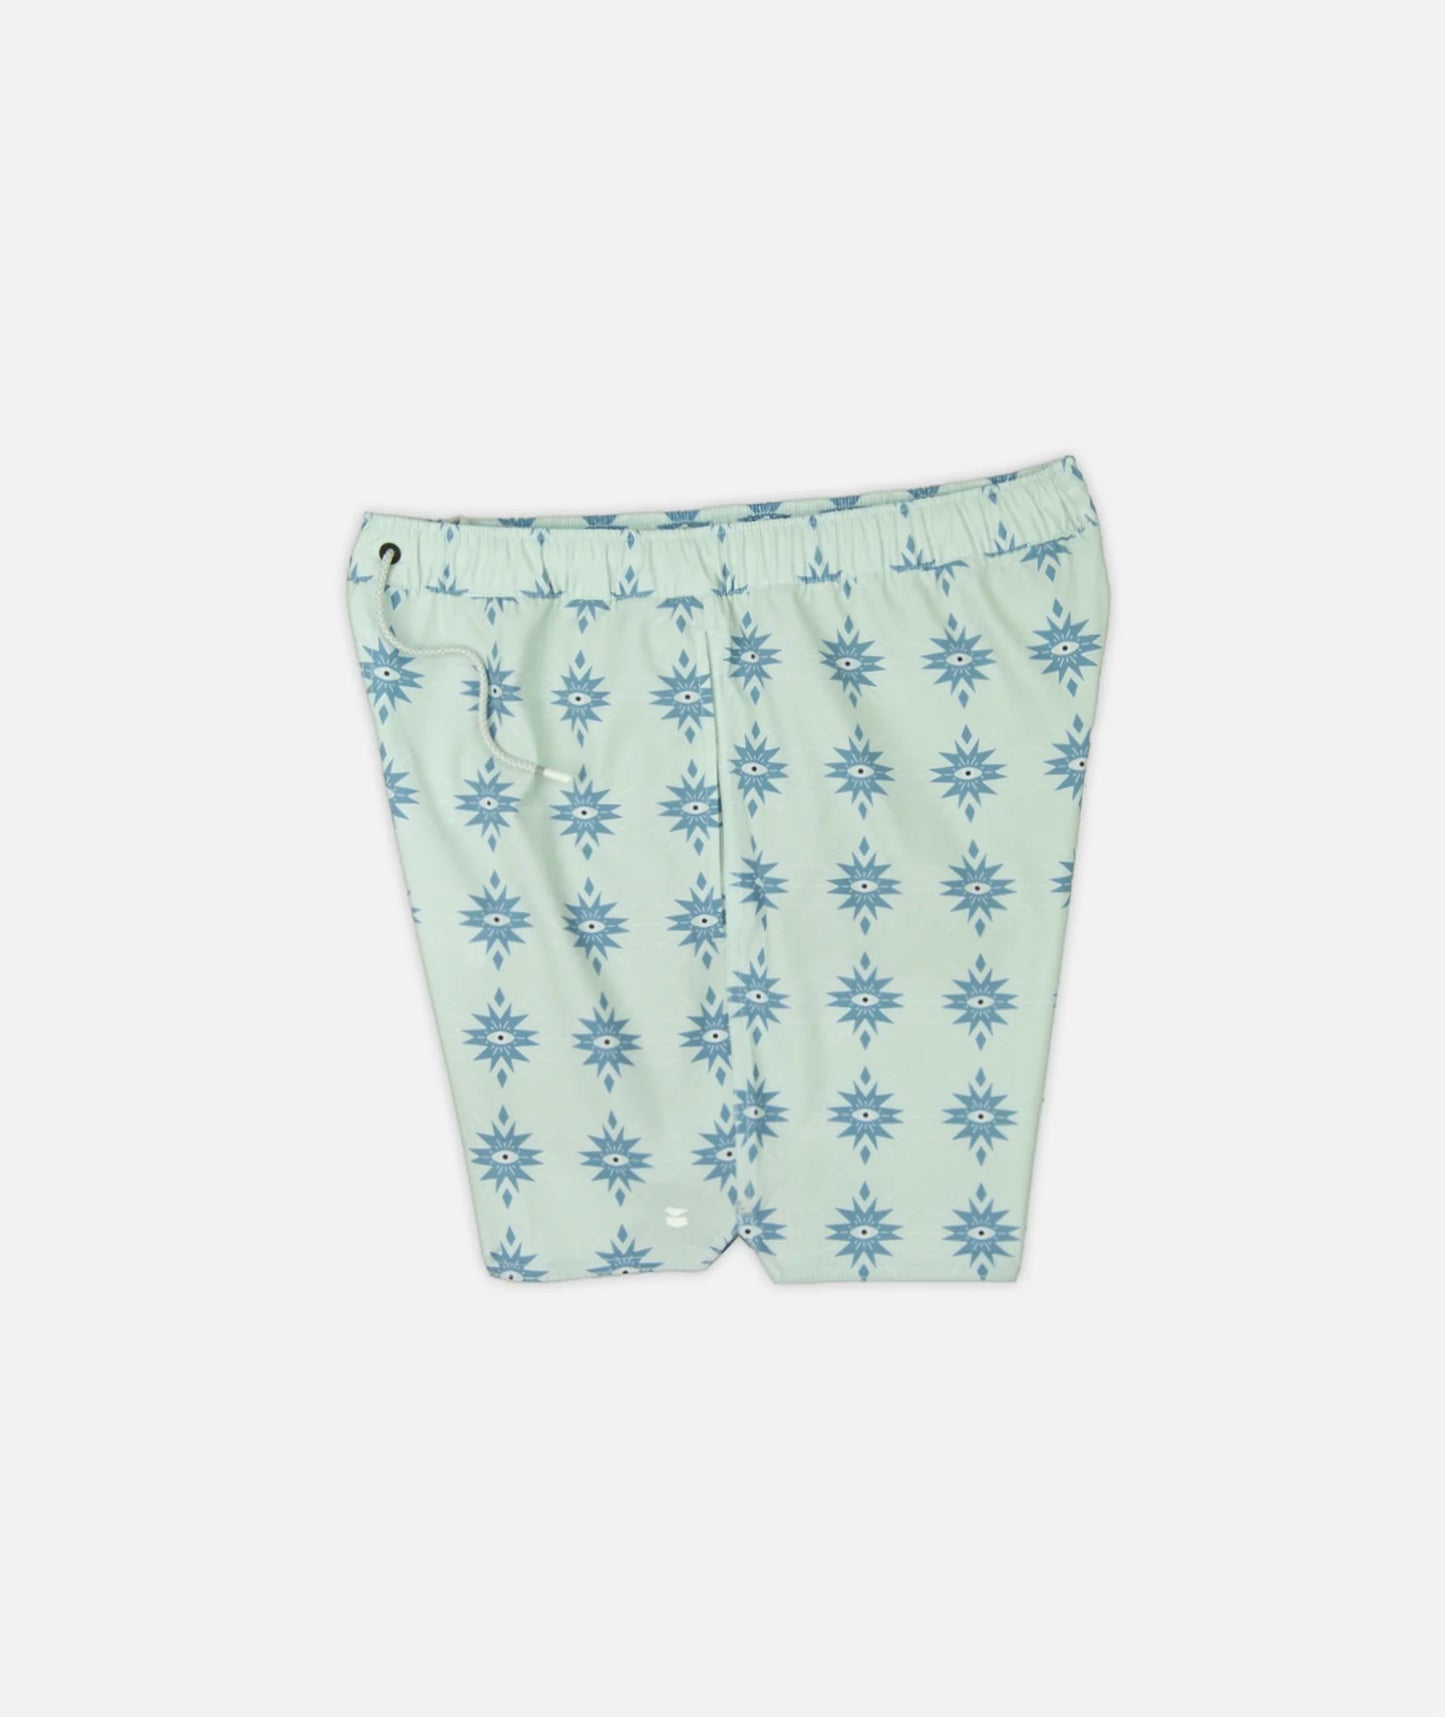 Bayside Volley Short - Teal